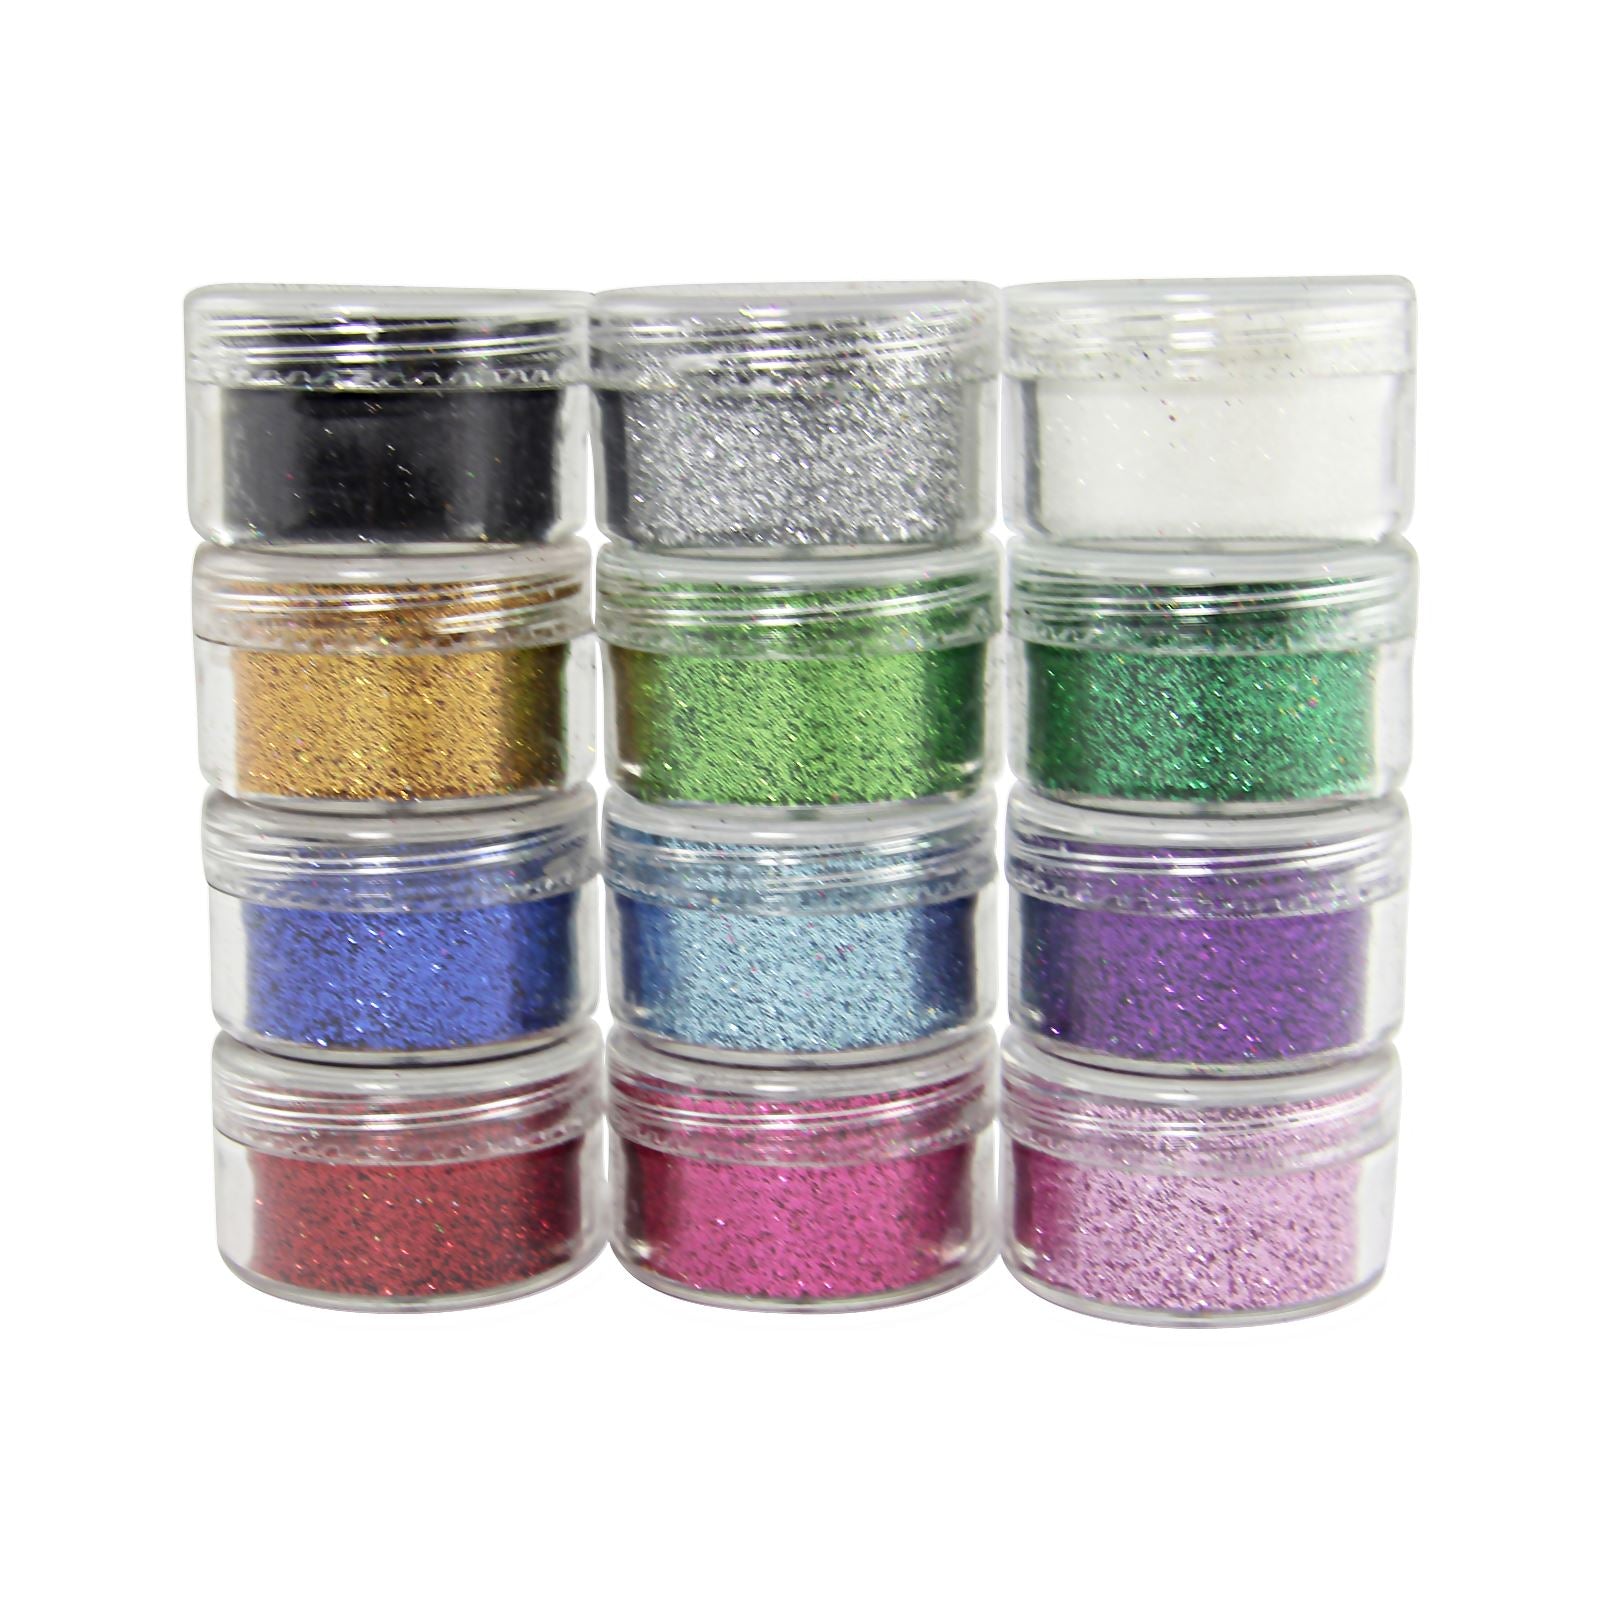 Set of 12 Large 10g Cosmetic Grade Assorted Glitter Pots